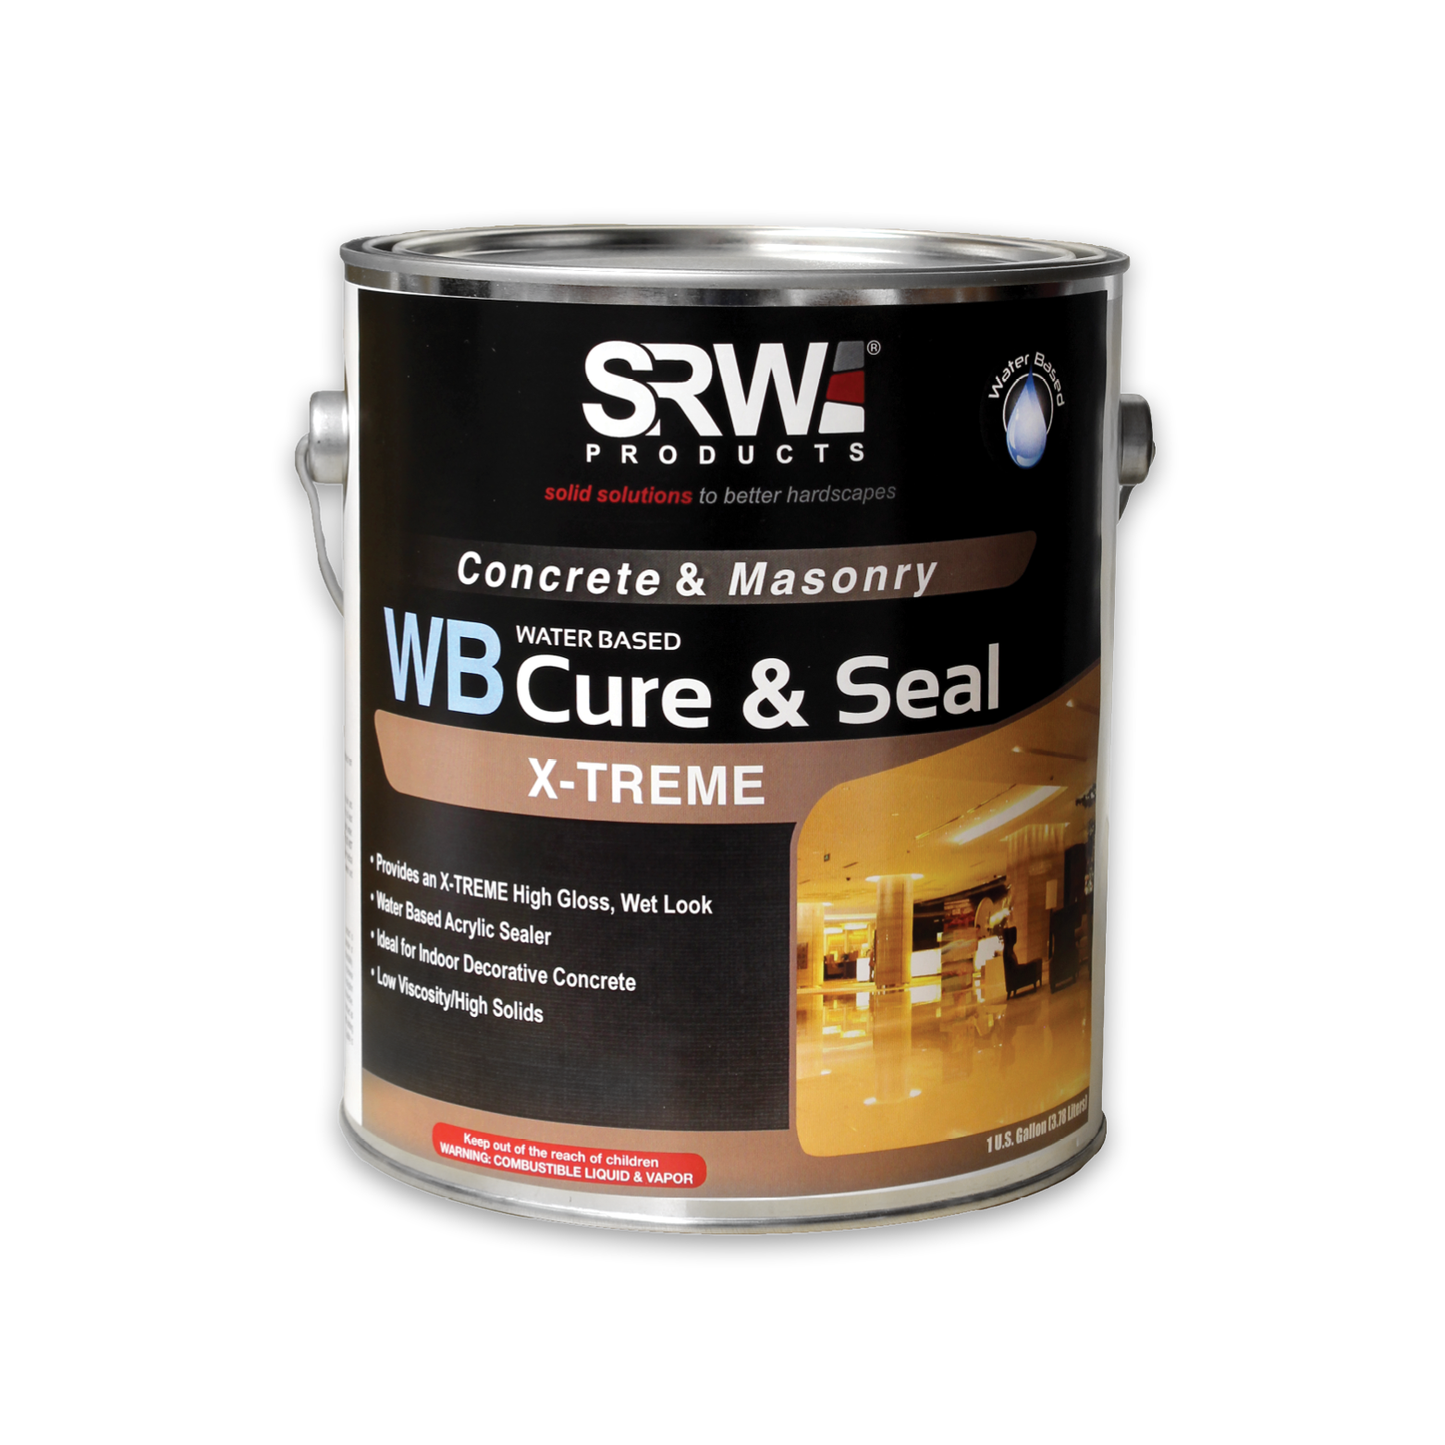 Water-Based X-treme Concrete Cure&Seal